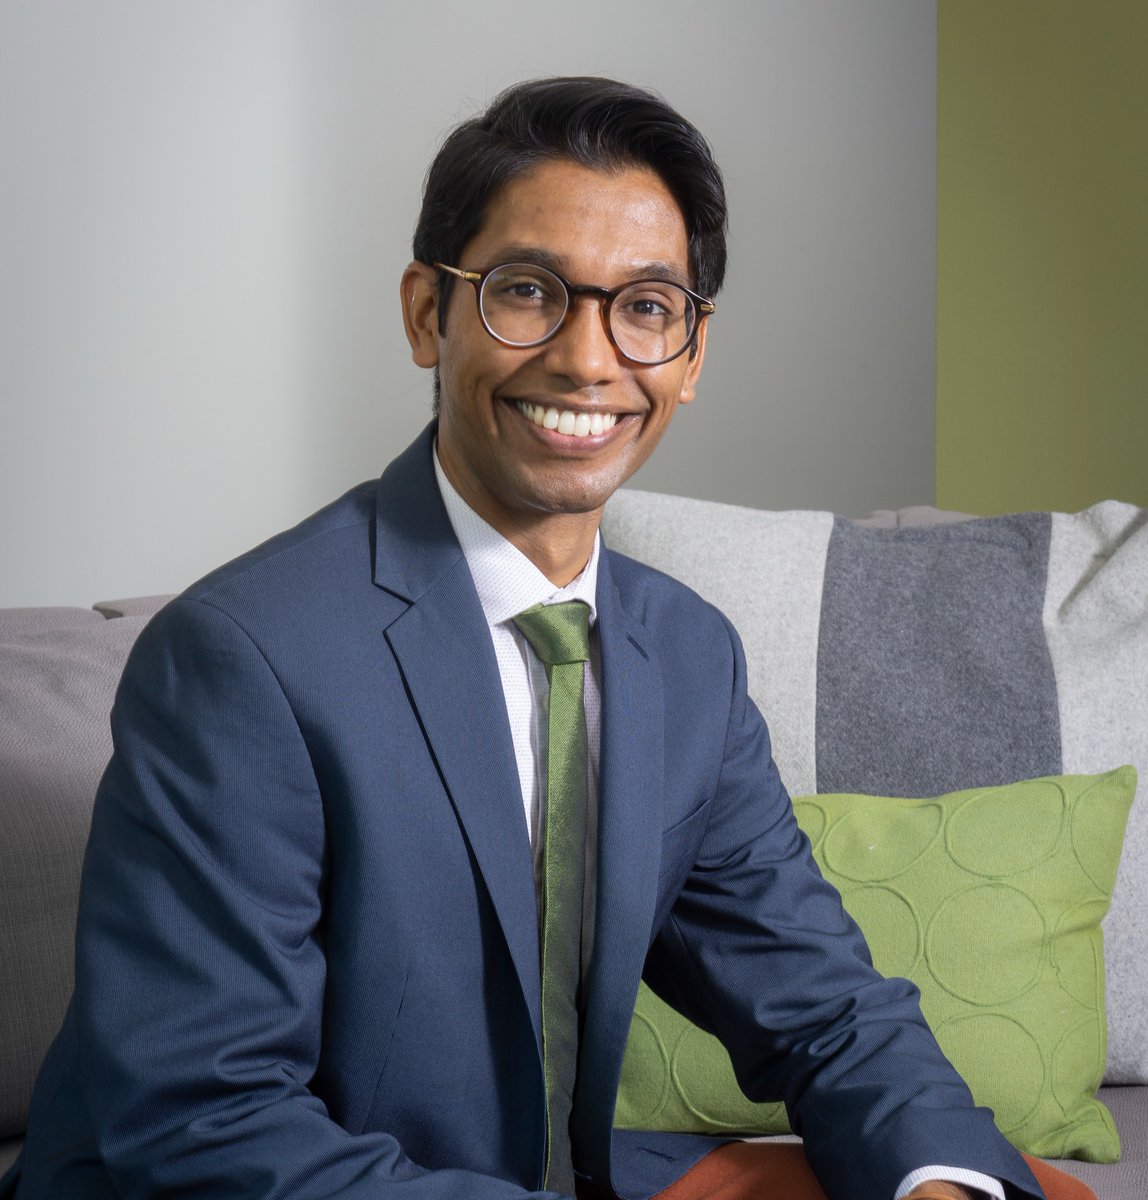 Meet Dr. Venkatesan (@ooMAYshh), an MRRI clinical neuropsychologist with expertise in #aging, #dementia, and #TBI. His current work focuses on brain changes post-TBI, factors influencing outcomes, and developing theory-based treatments. Read more: jefferson.edu/academics/coll…